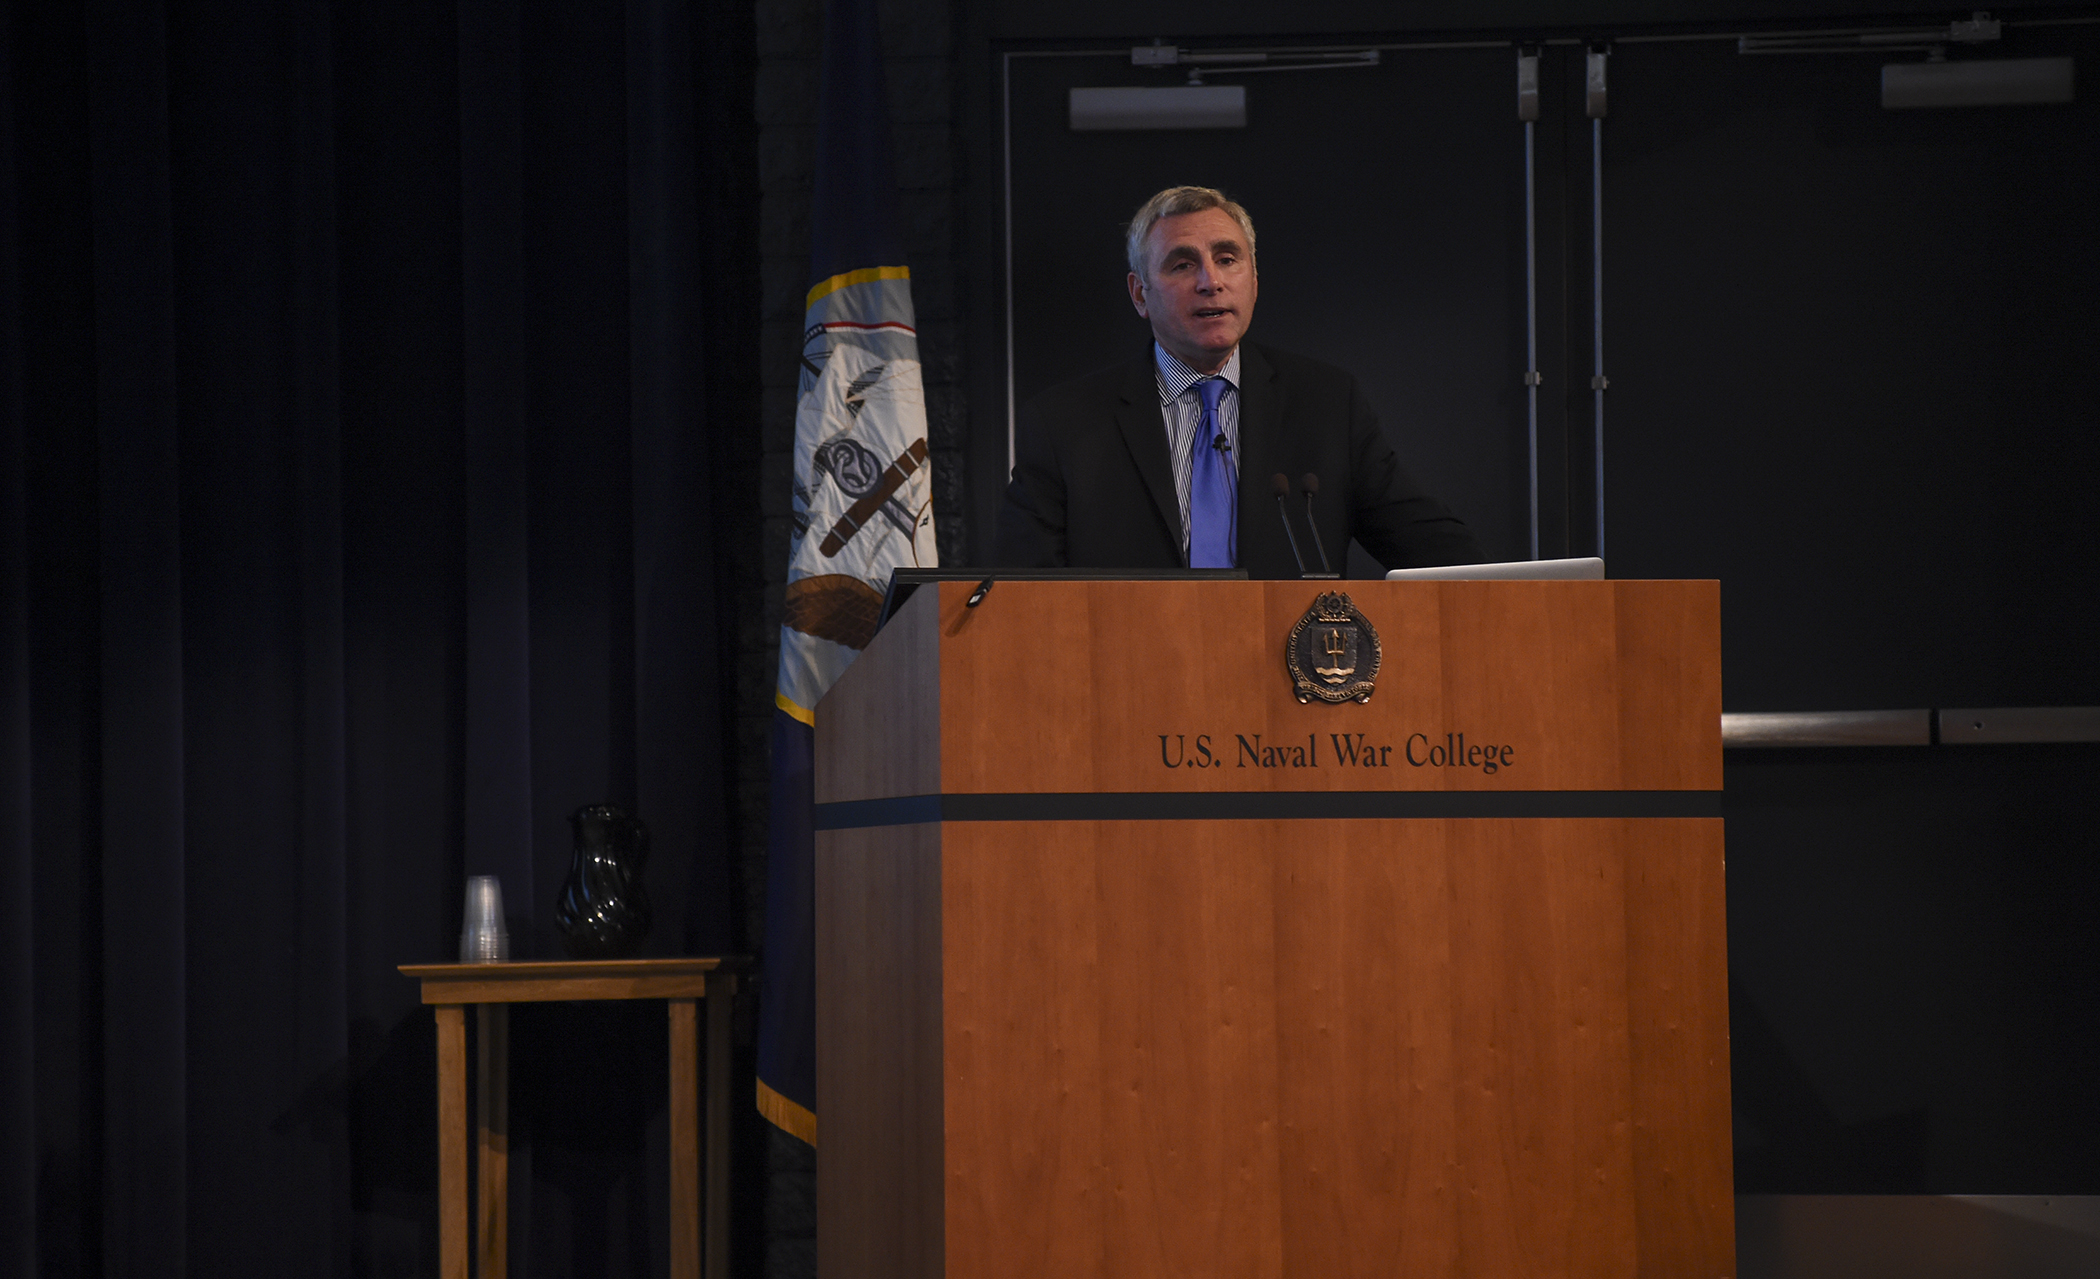 John A. Davis, retired Army major general and vice president and federal chief security officer at Palo Alto Networks, speaks about his cyber experiences and deterrence in cyberspace during U.S. Naval War College’s (NWC) inaugural Future Warfighting Symposium held at the college in Newport, Rhode Island. 